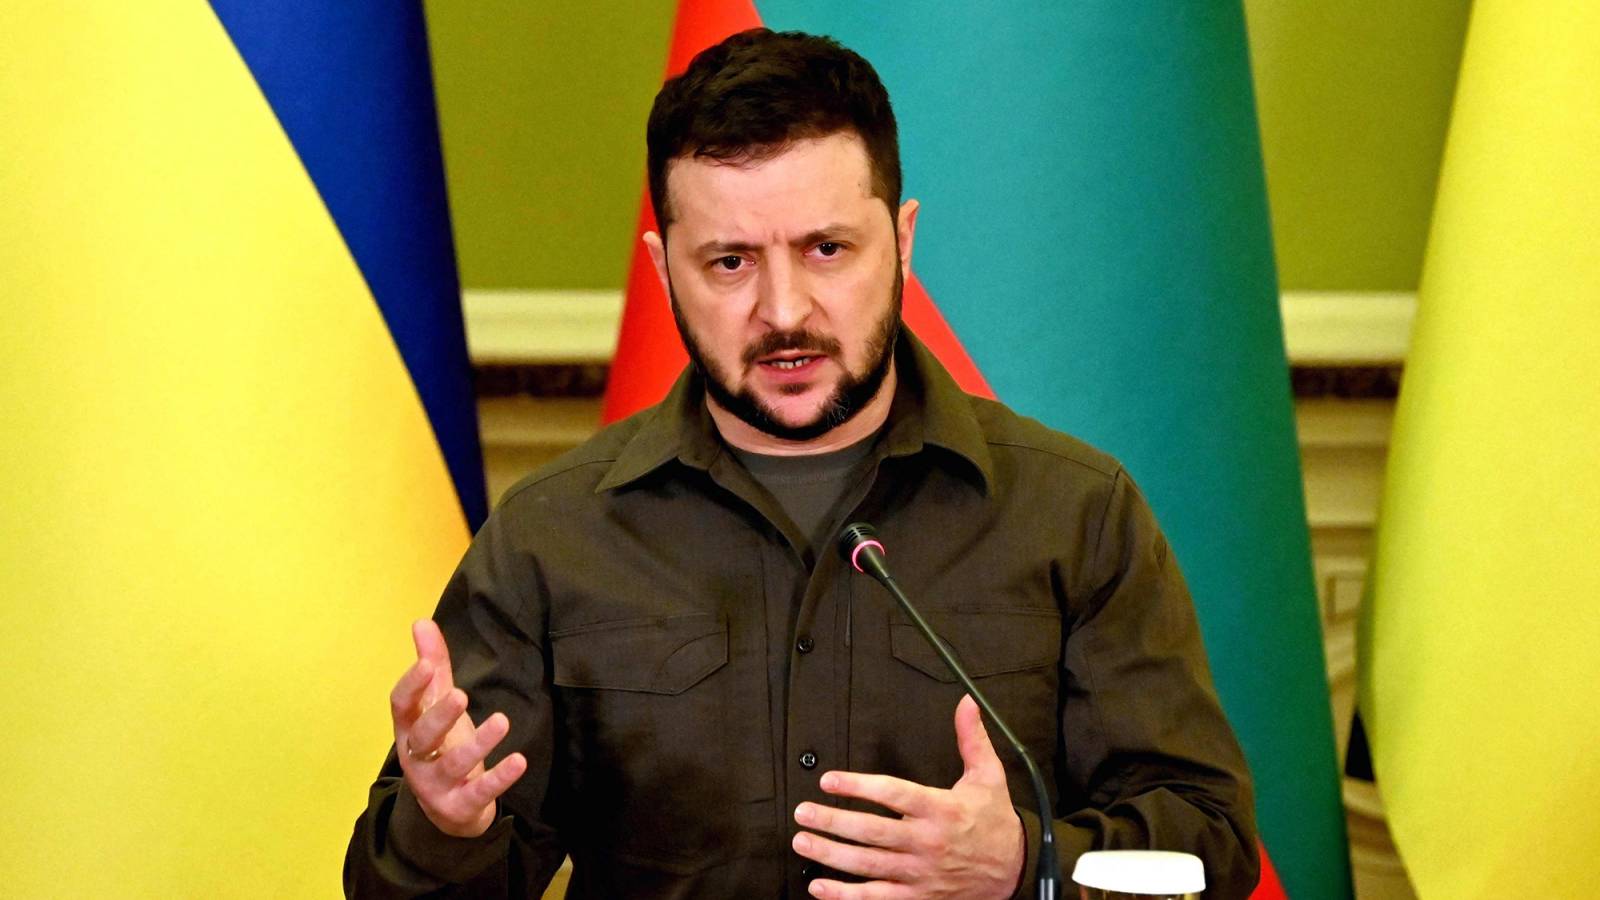 Volodymyr Zelensky Talks about the Huge Areas in Ukraine that have been Mined